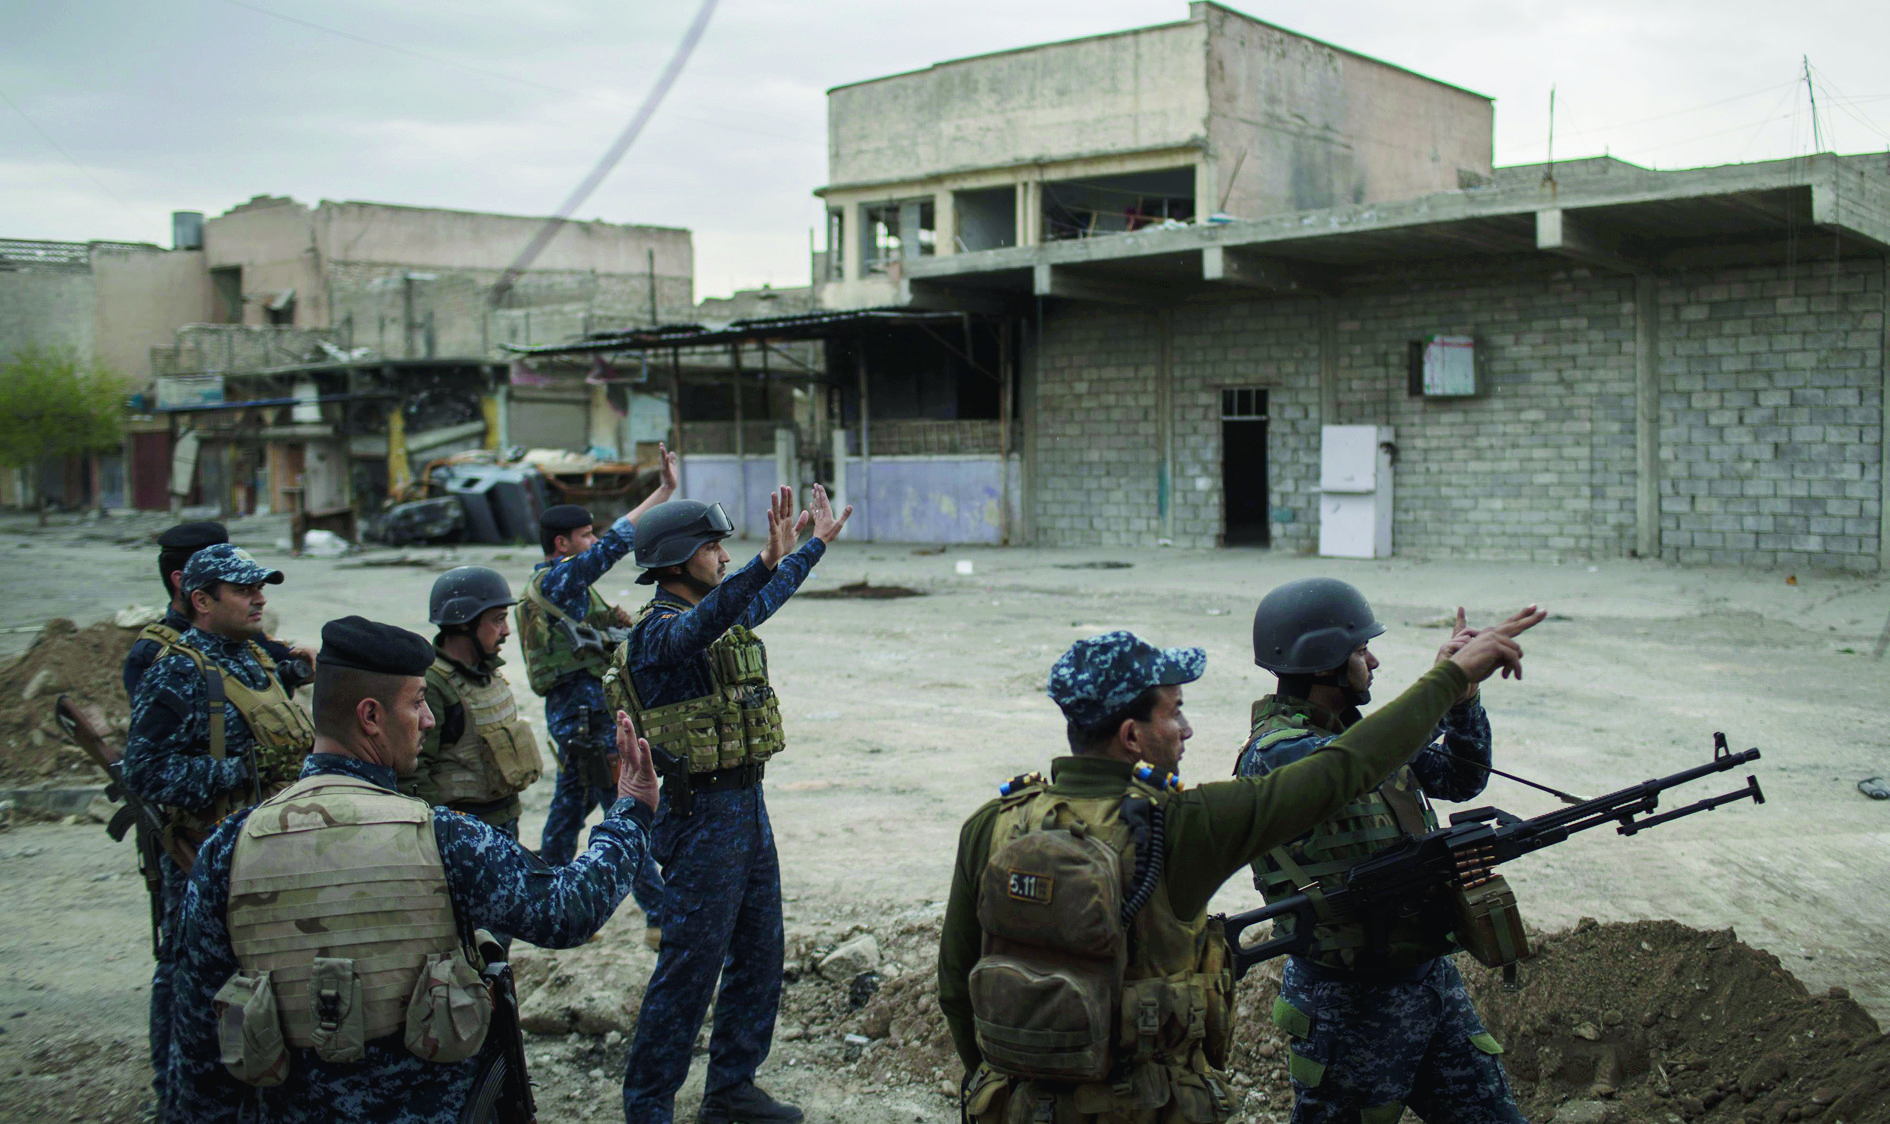 Federal Police soldiers gesture to other soldiers near the old city, during fighting against Islamic State militants on the western side of in Mosul, Iraq, Tuesday, March 28, 2017. (AP Photo/Felipe Dana) Iraq Mosul